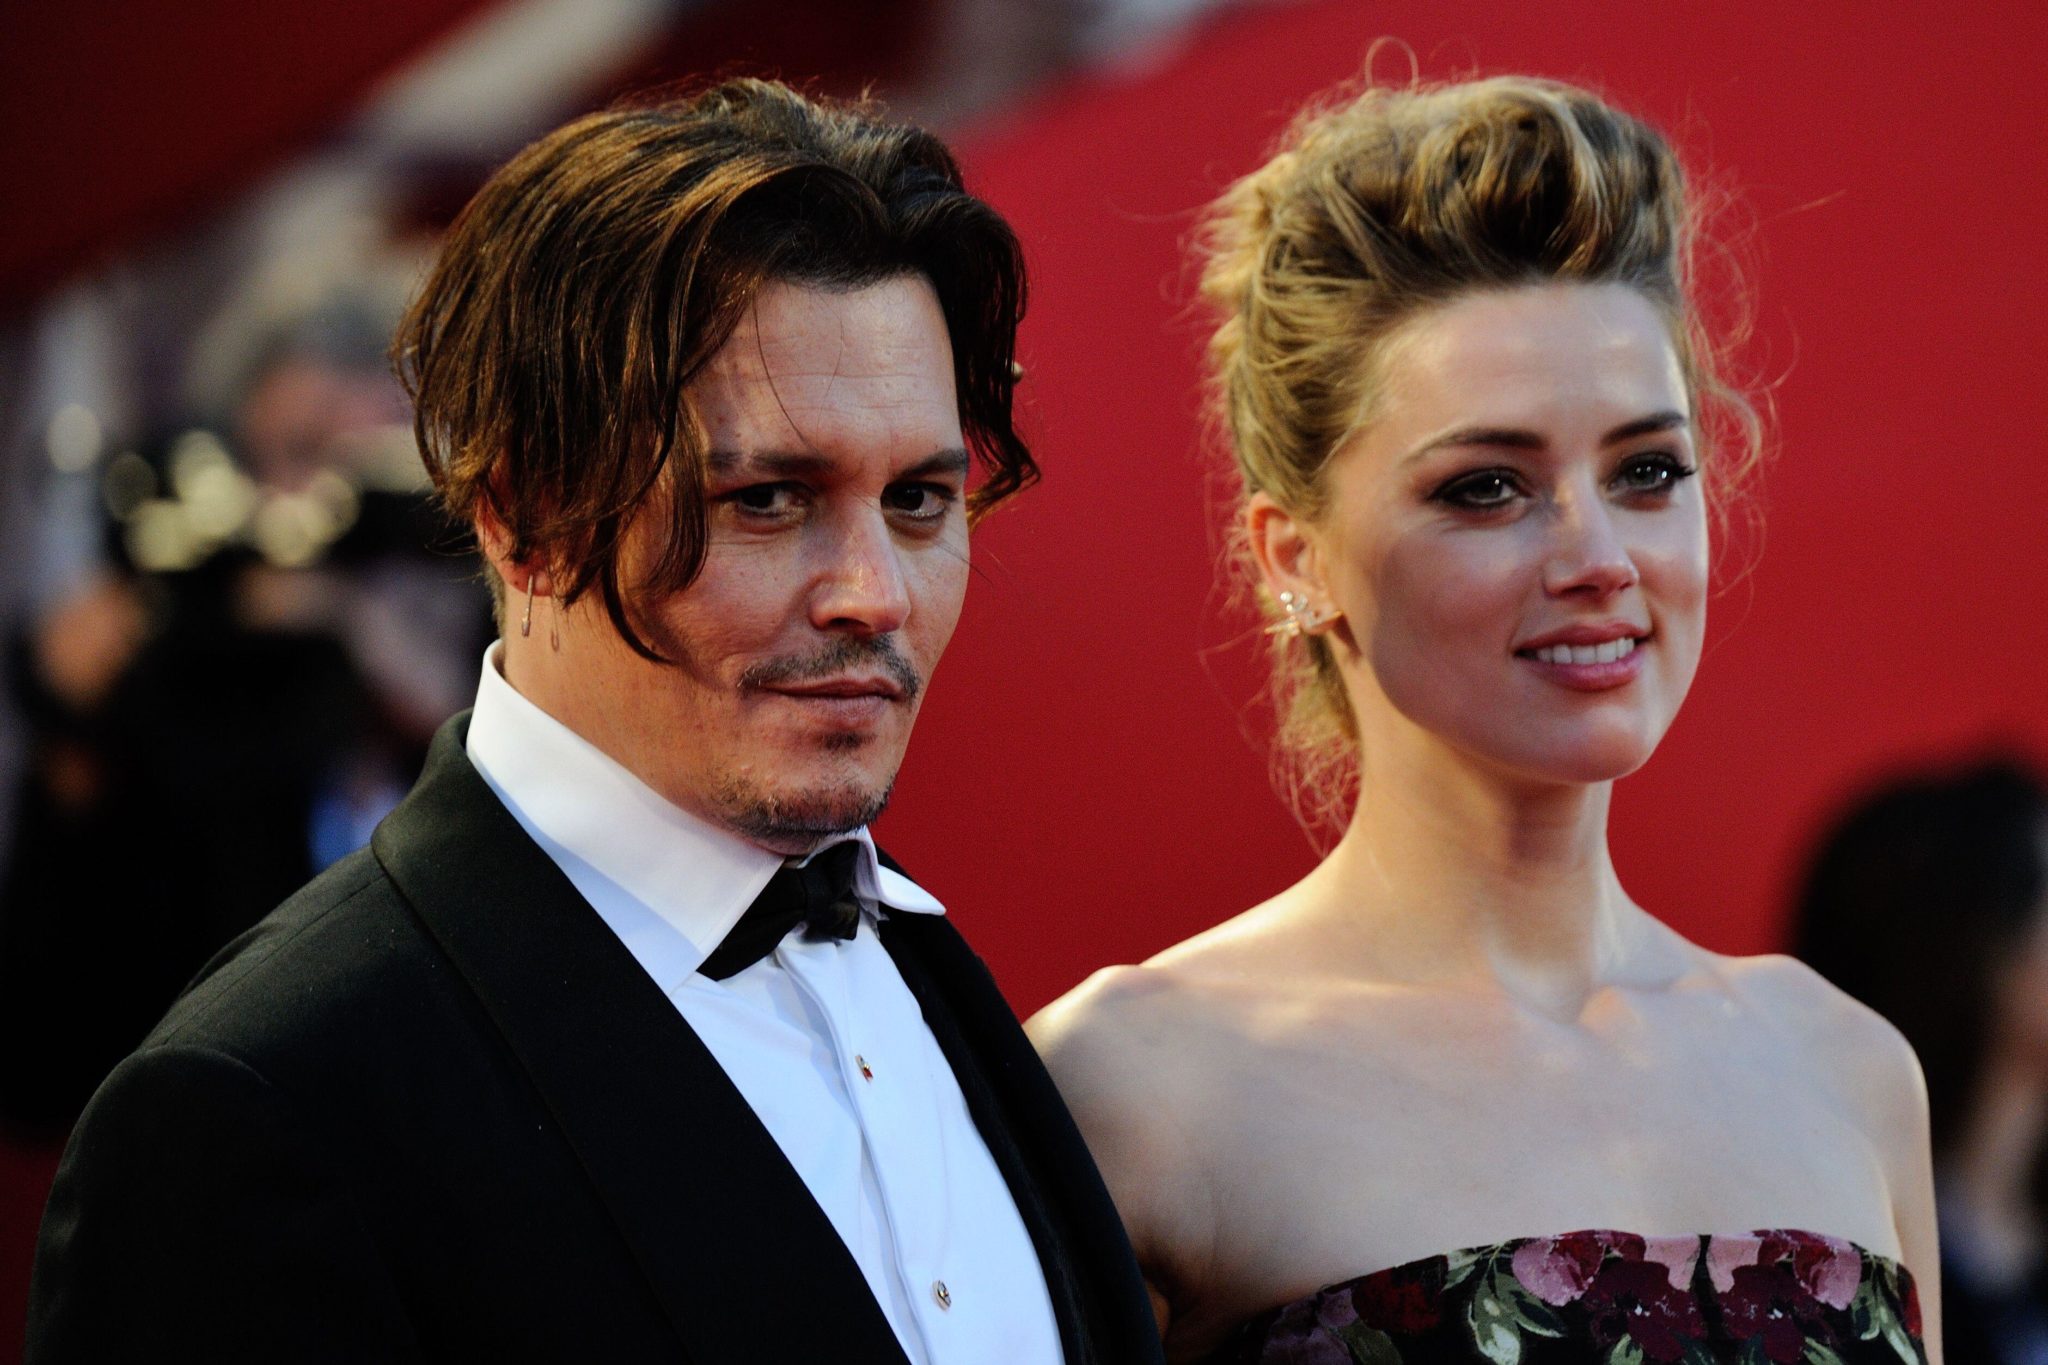 Johnny Depp and Amber Heard attend The Danish Girl premiere as part of the 72nd Venice International Film Festival in Venice, Italy in September 2015.